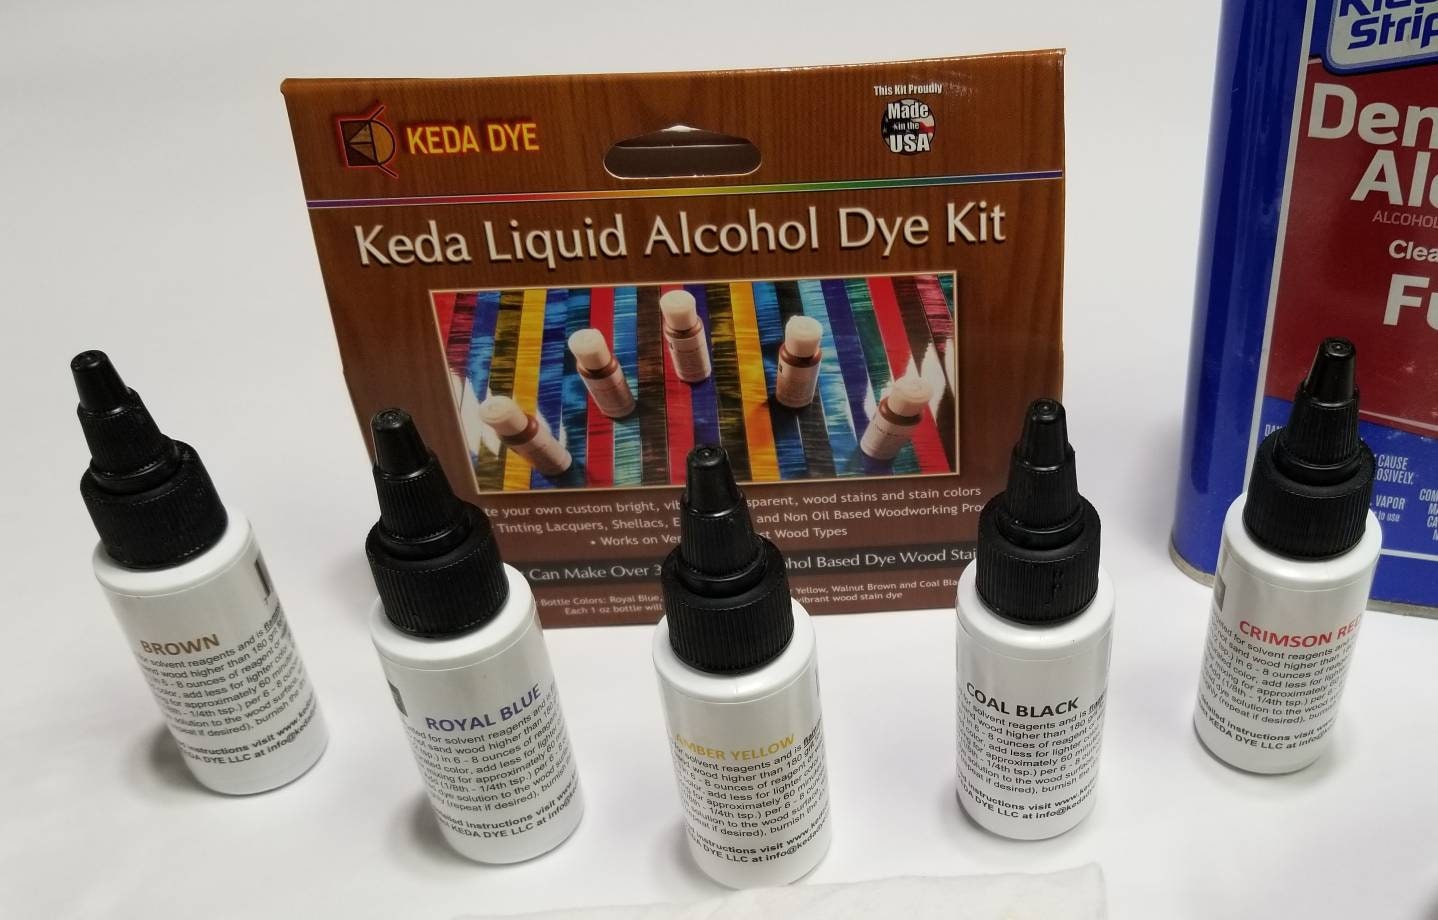 Keda Dye 5 Color Liquid Dye Kit Contains 5 Alcohol Dye Colors in One Easy  to Use Kit -  Canada